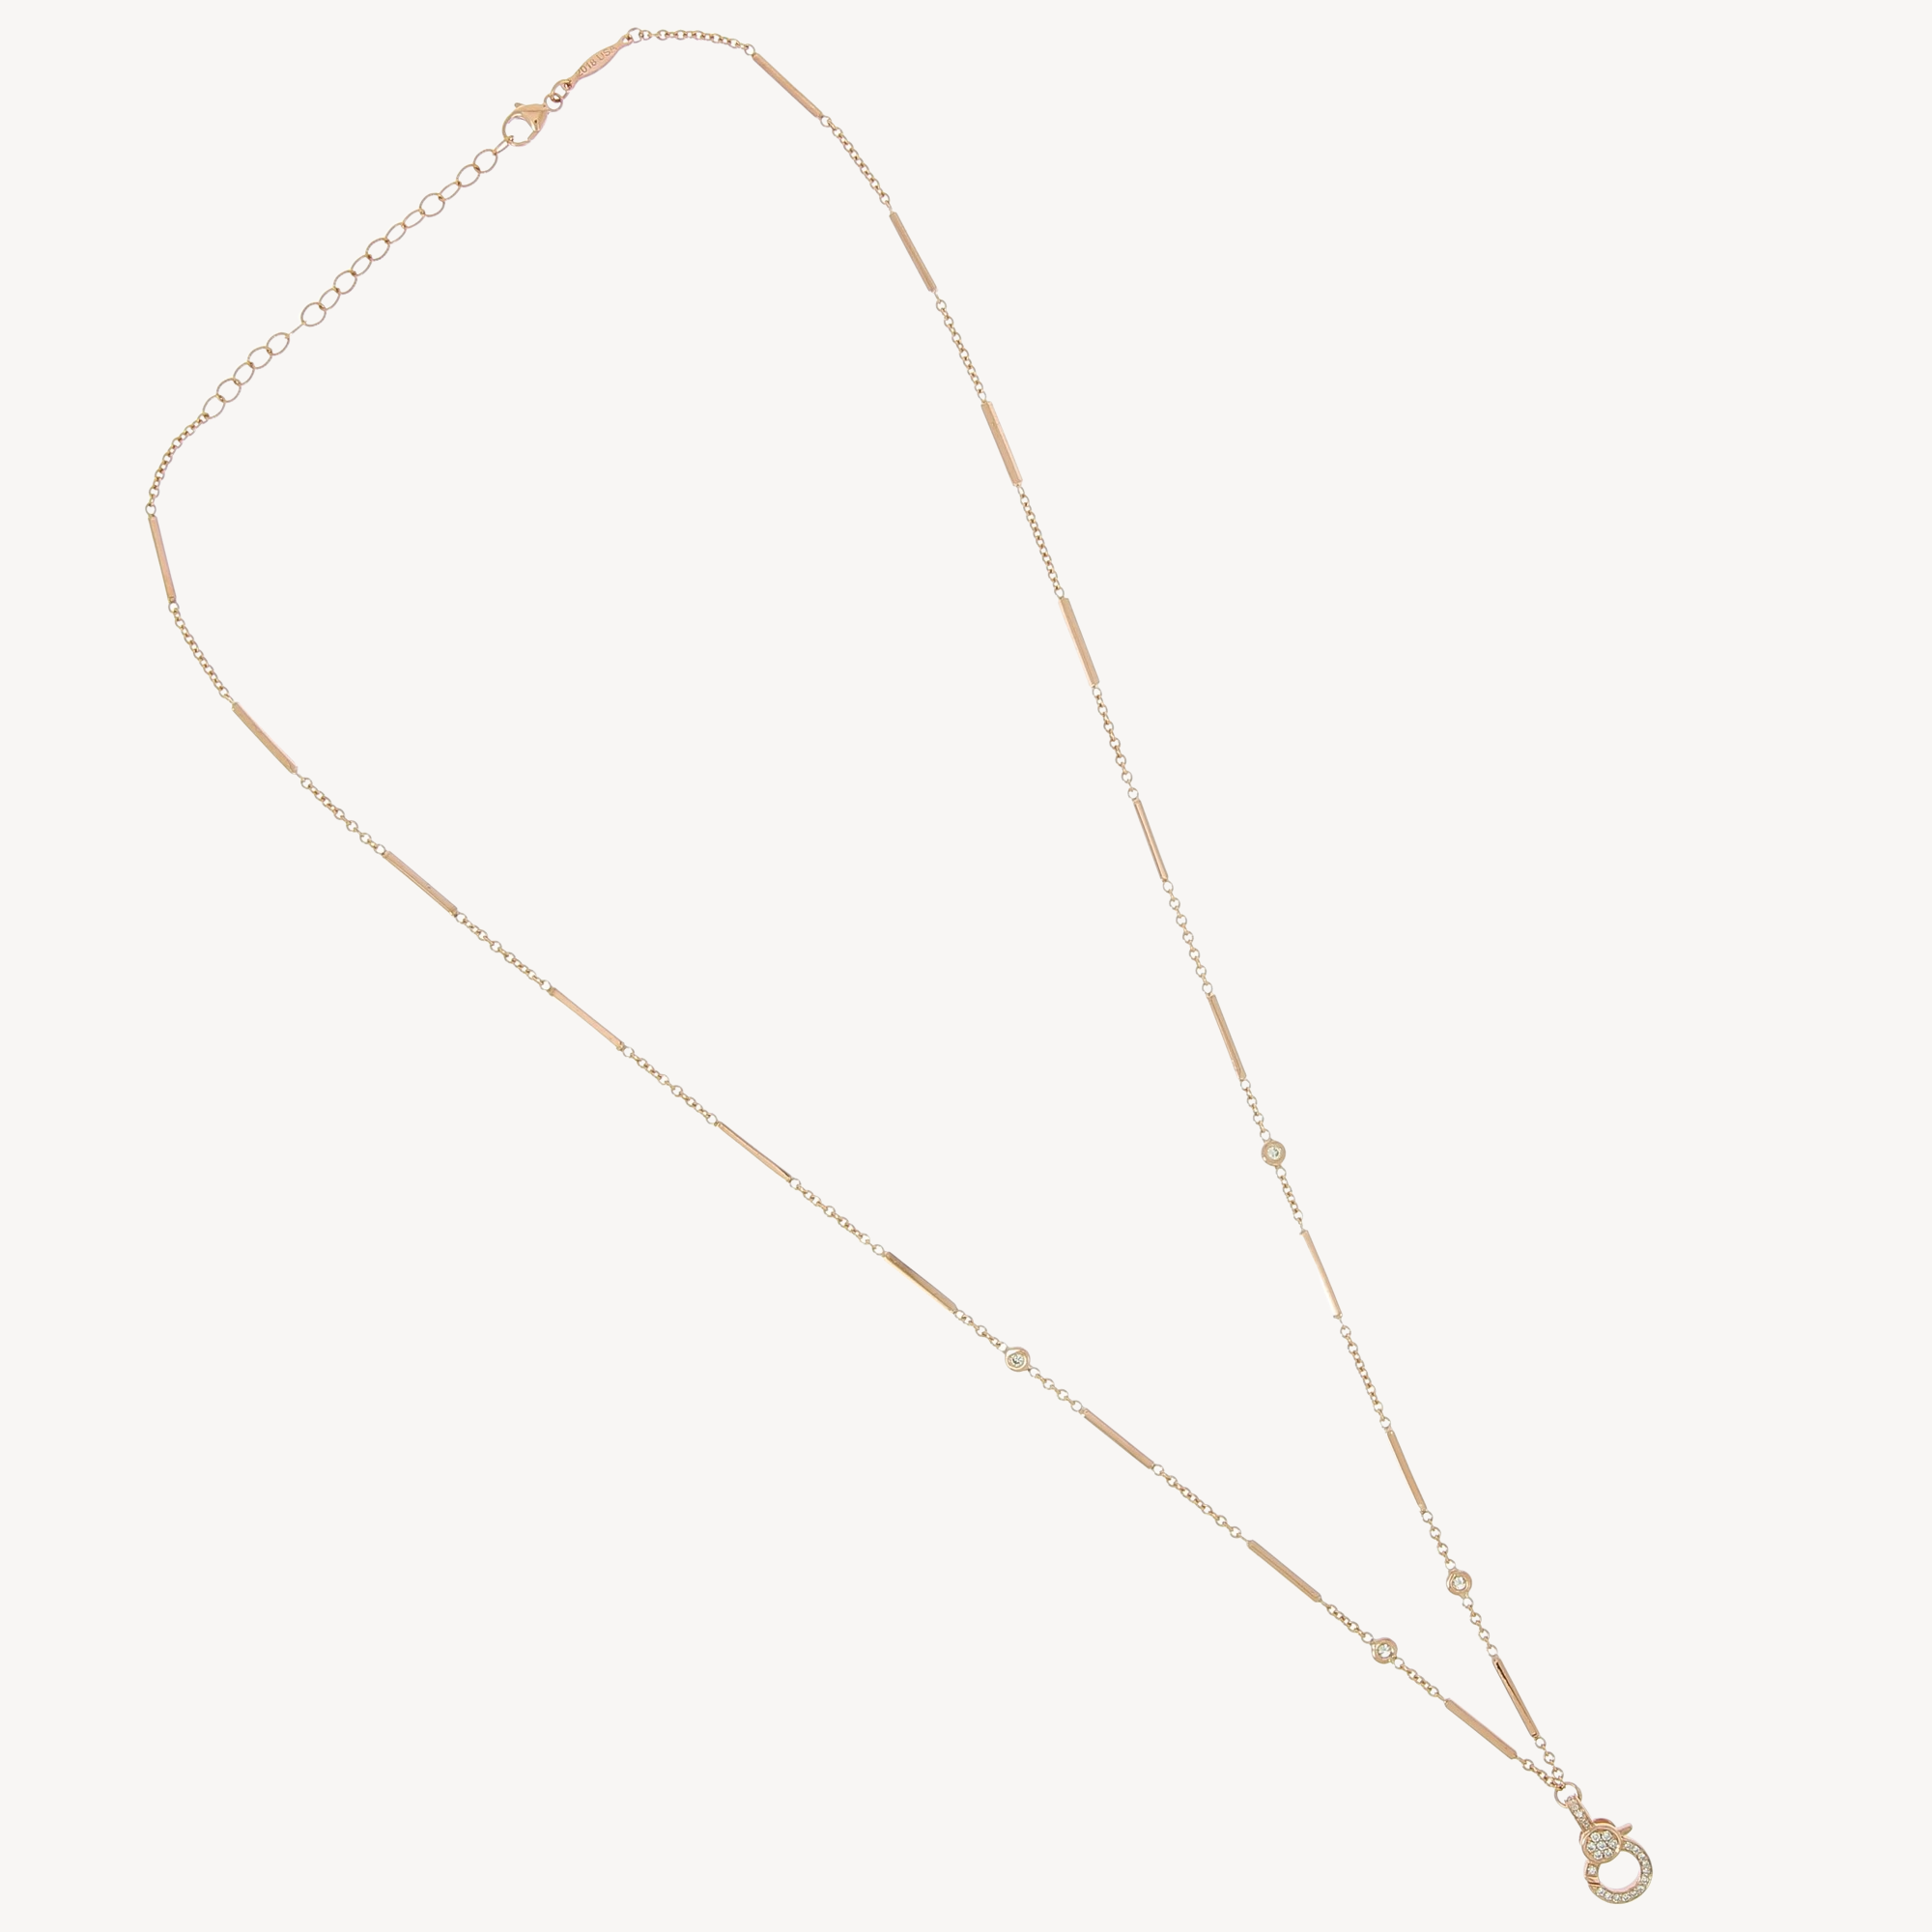 Pink Gold Necklace with Paved Diamond Charms